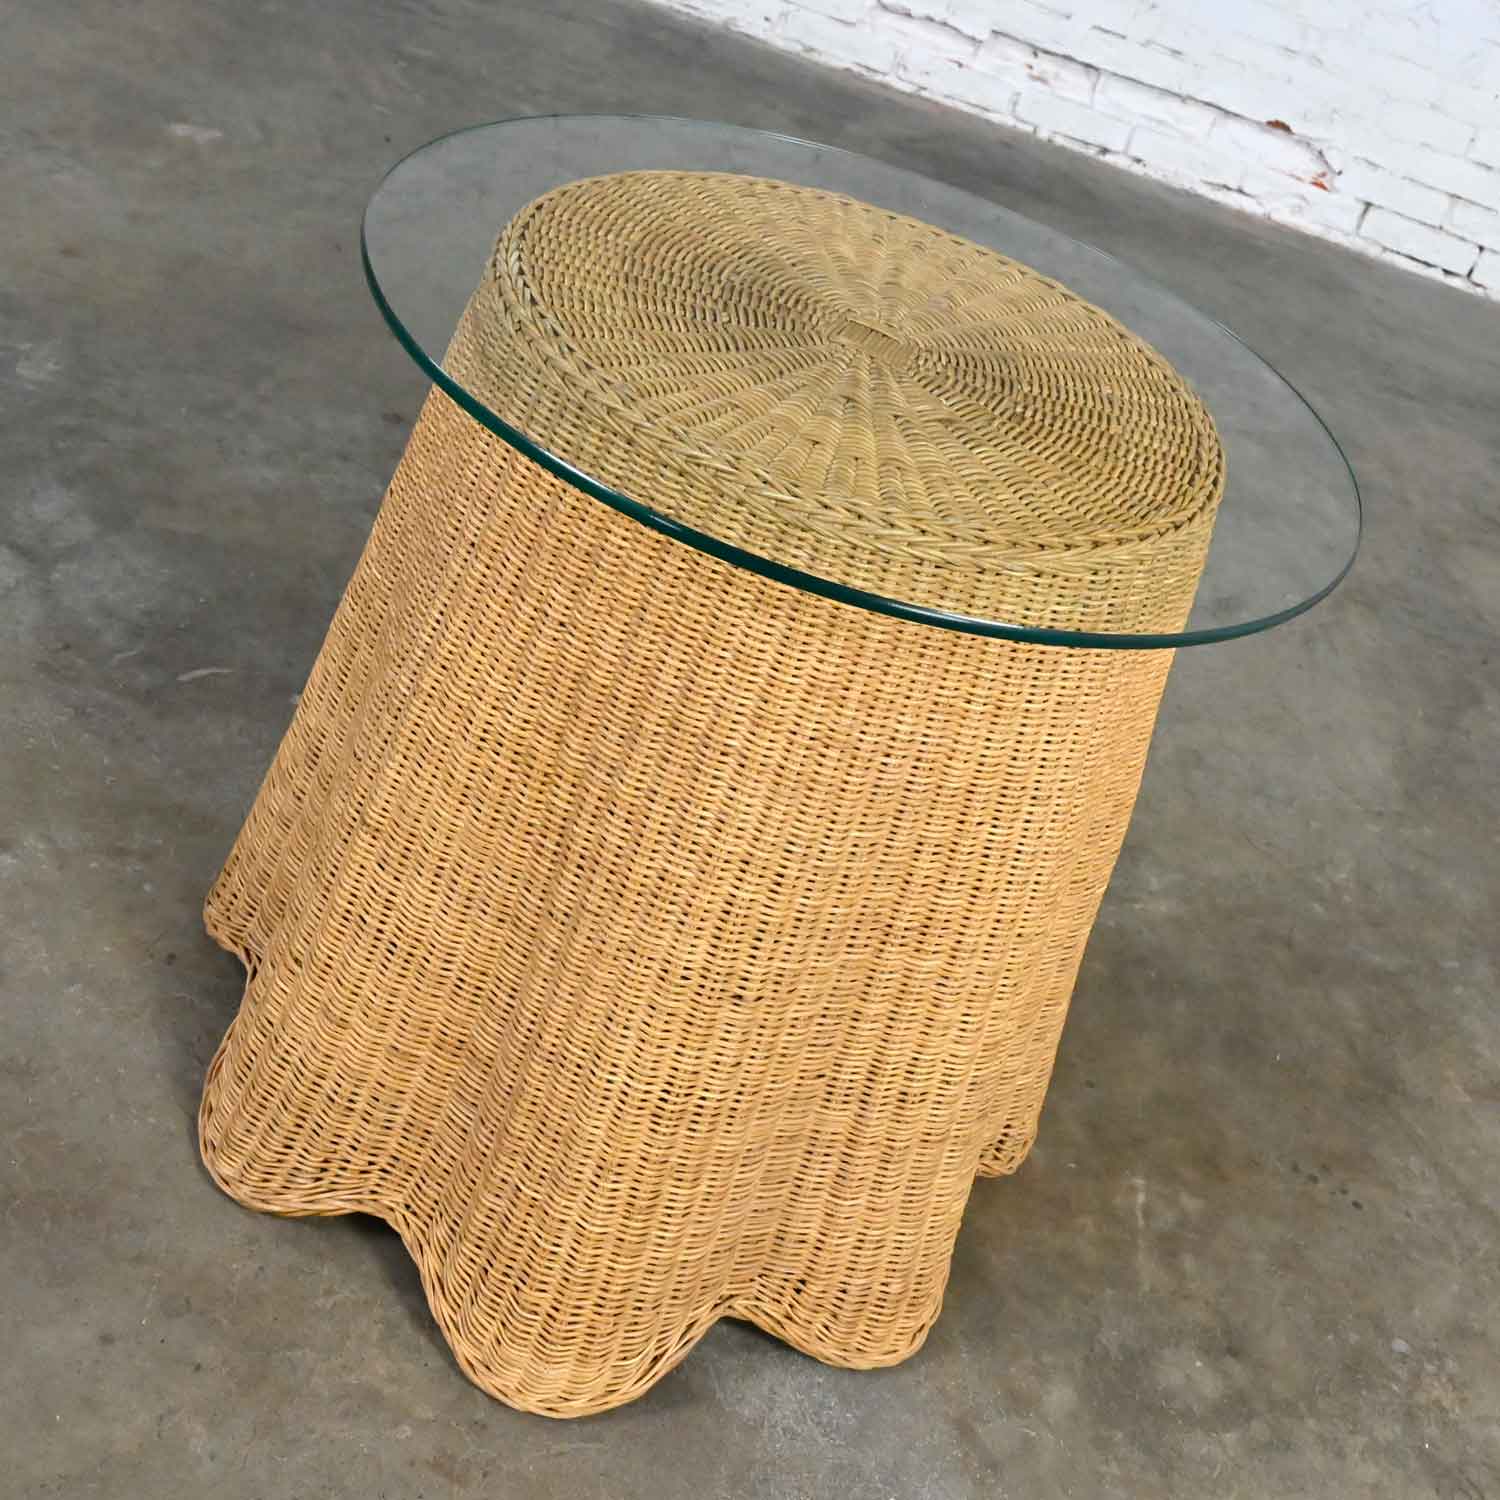 Vintage Trompe L’oeil Draped Wicker End or Side Table with Round Glass Top